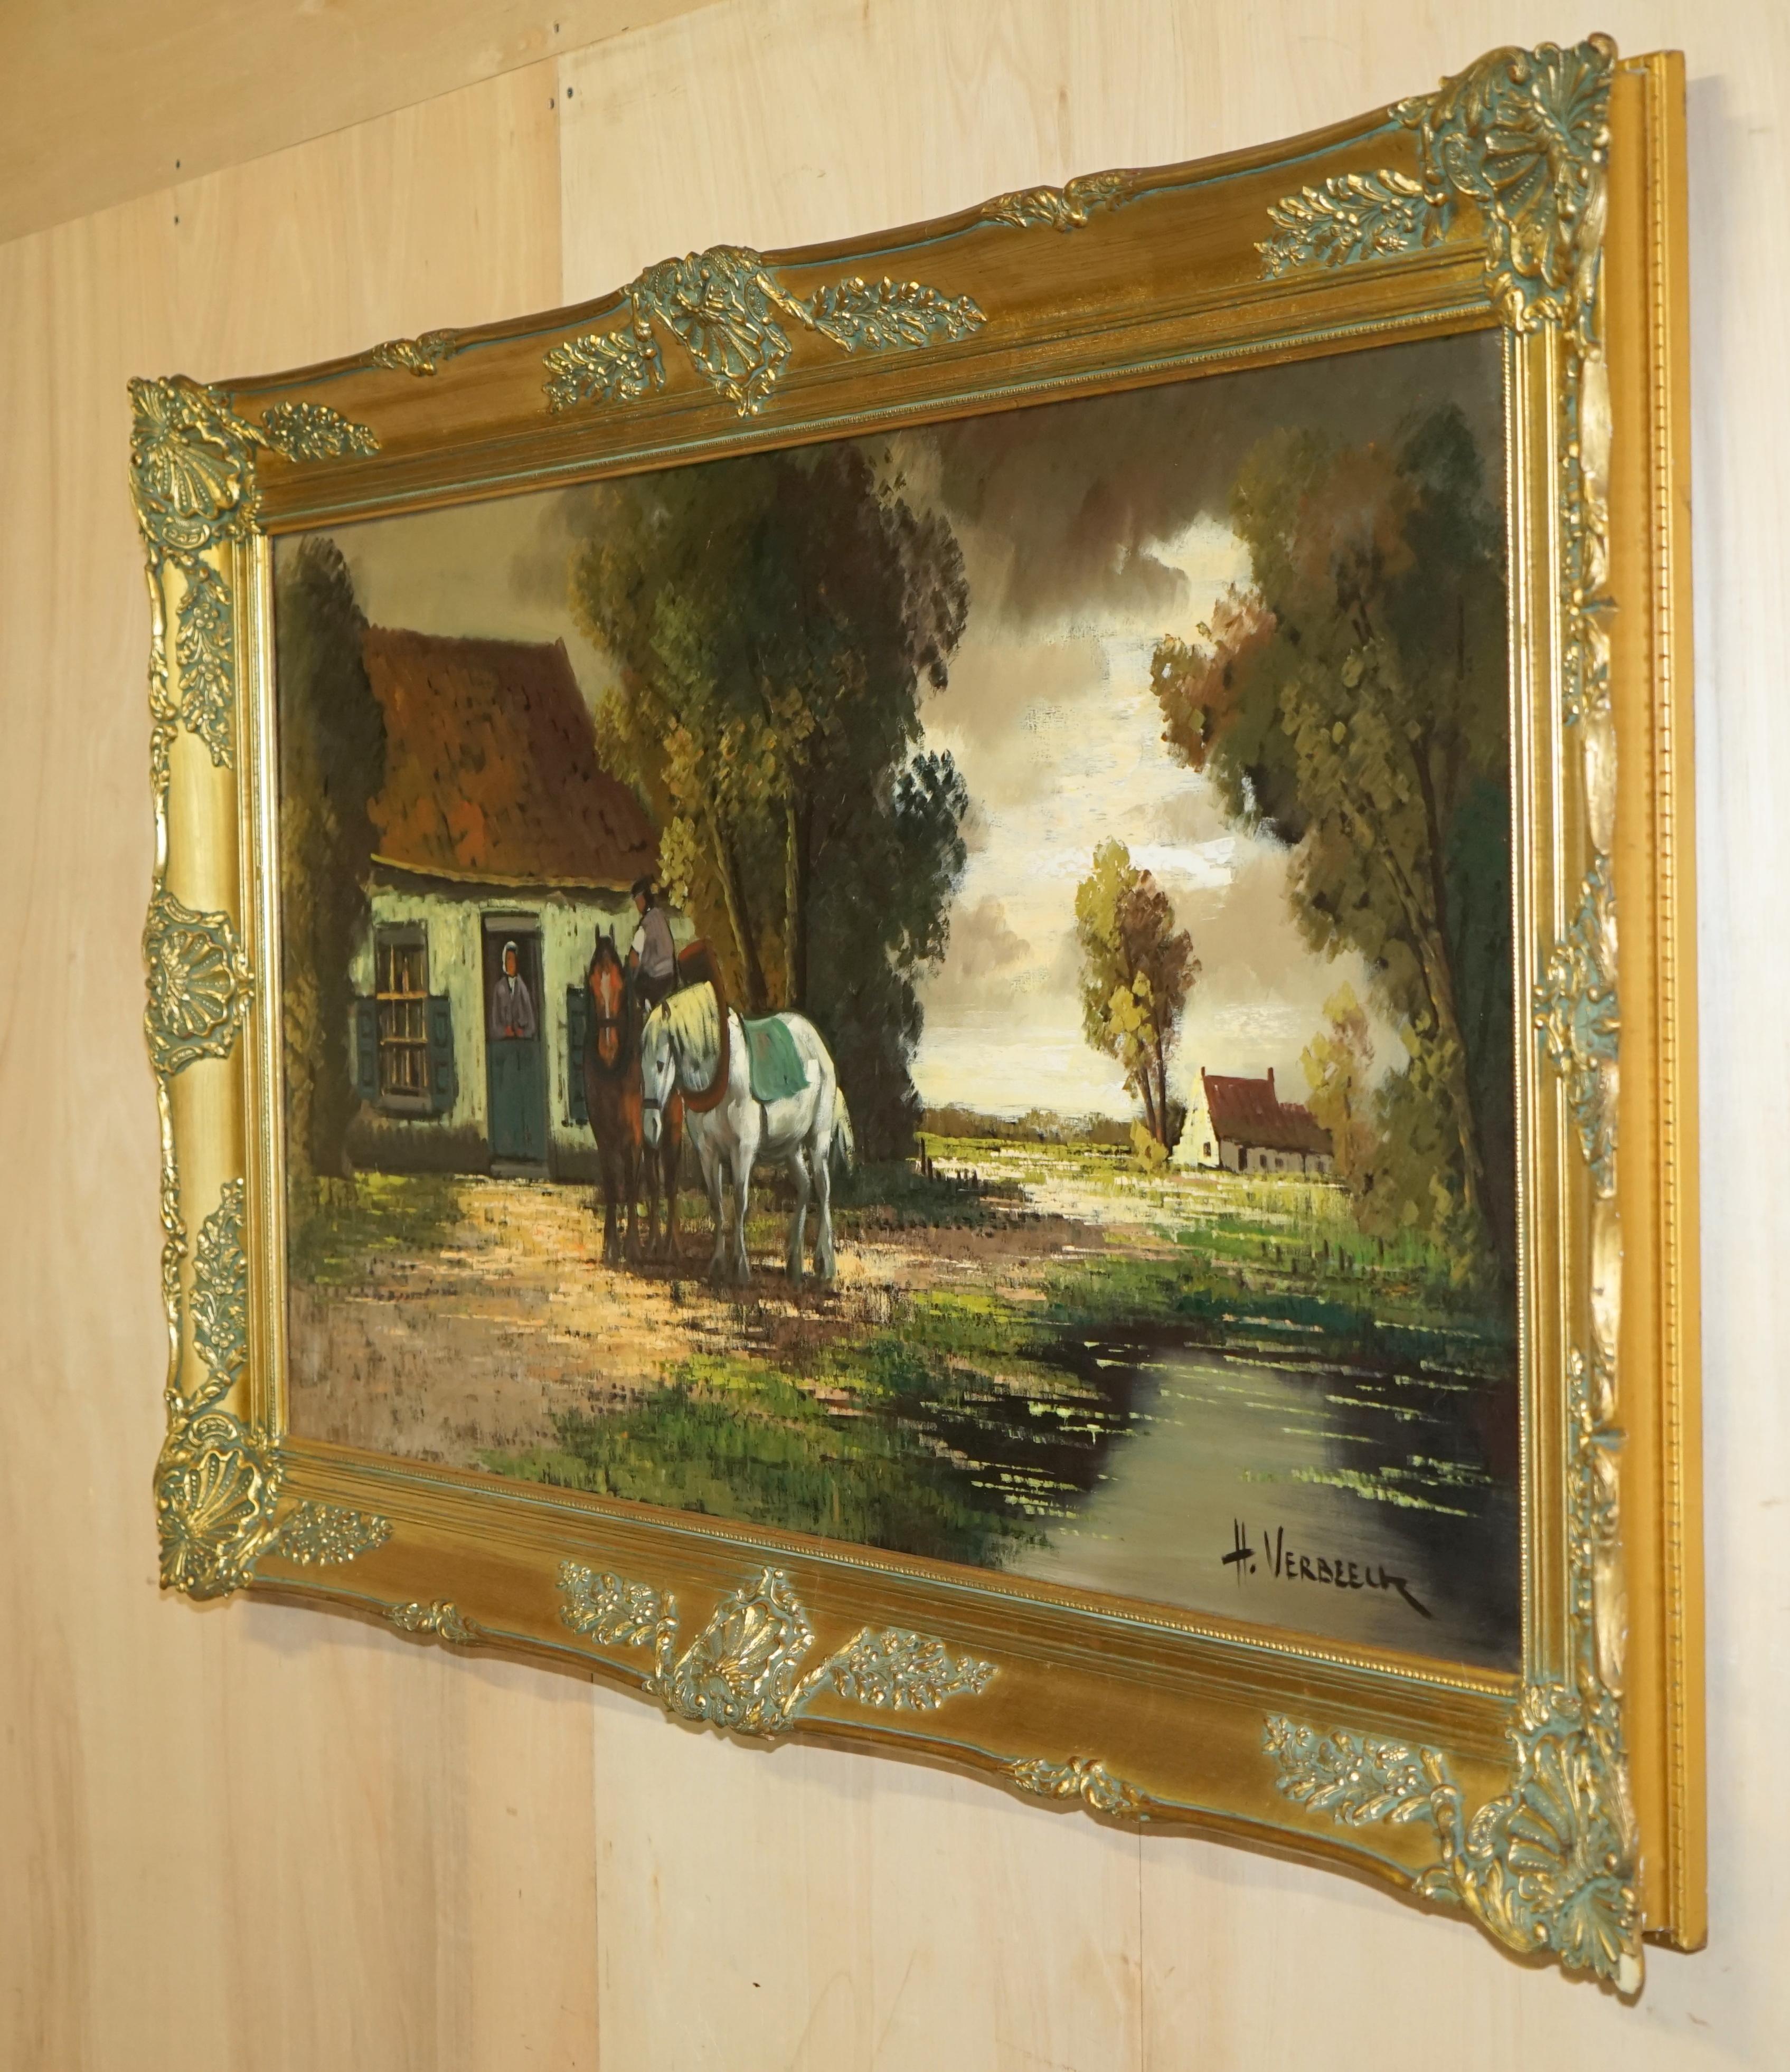 EXTRA LARGE 159X94CM H. VERBEELK SiGNED OIL PAINTING OF A RURAL SCENE WITH HORSE For Sale 9